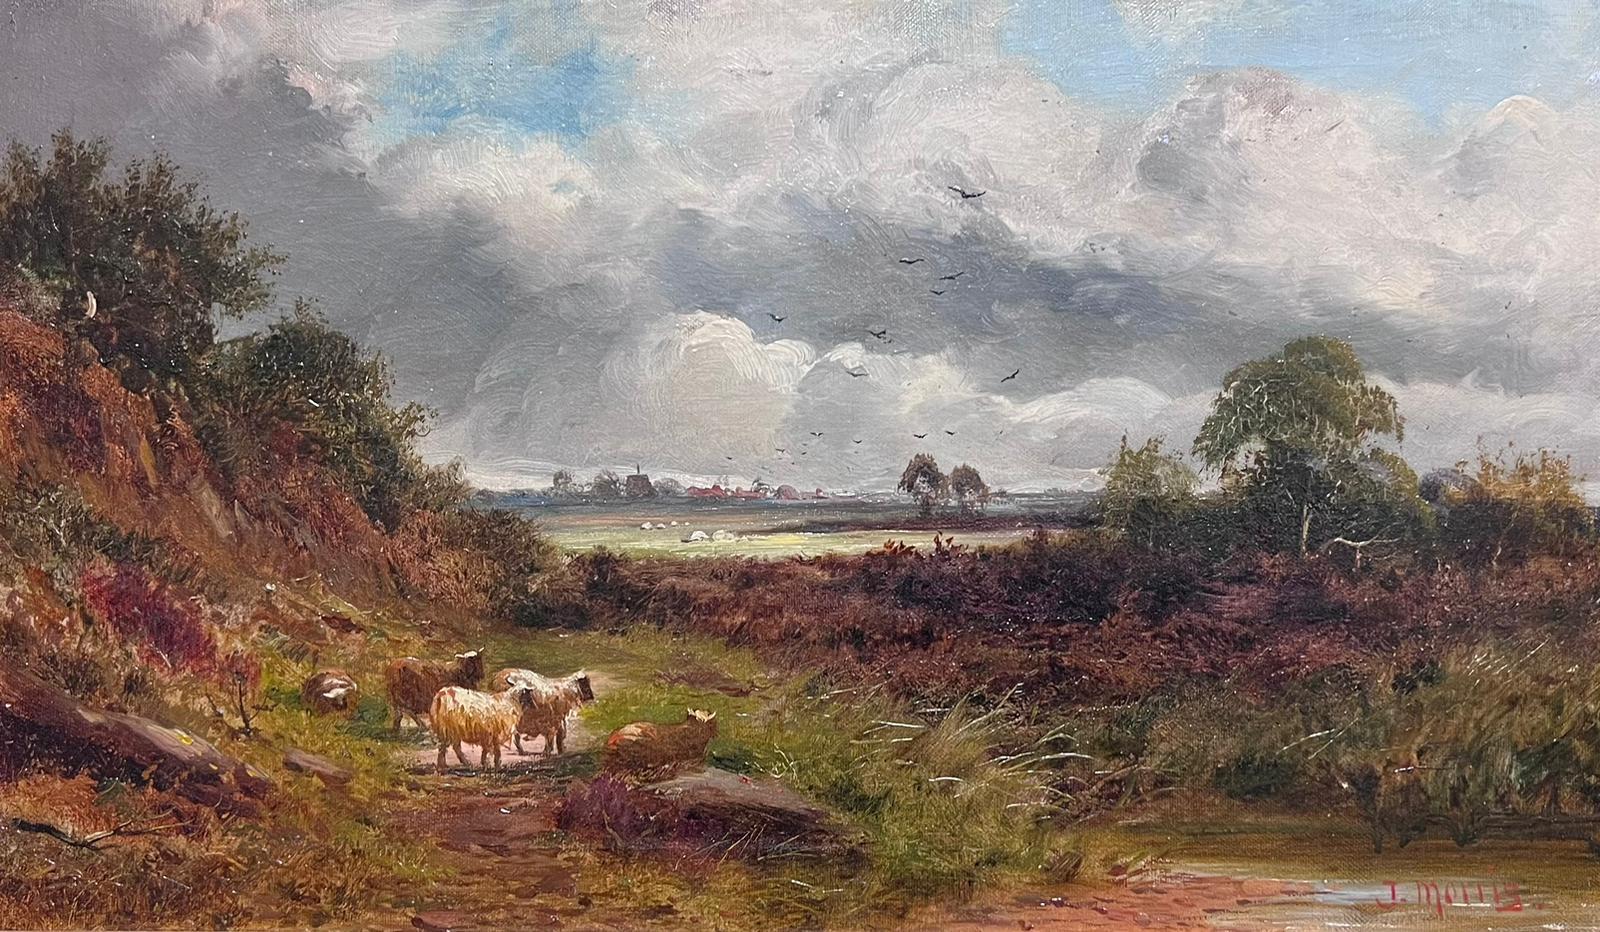 Pastoral Landscape with Sheep
by J. Morris, British 19th century
signed oil on canvas, framed
framed: 15 x 23 inches
canvas: 12 x 20.75 inches
provenance: private collection, UK
condition: very good and sound condition 